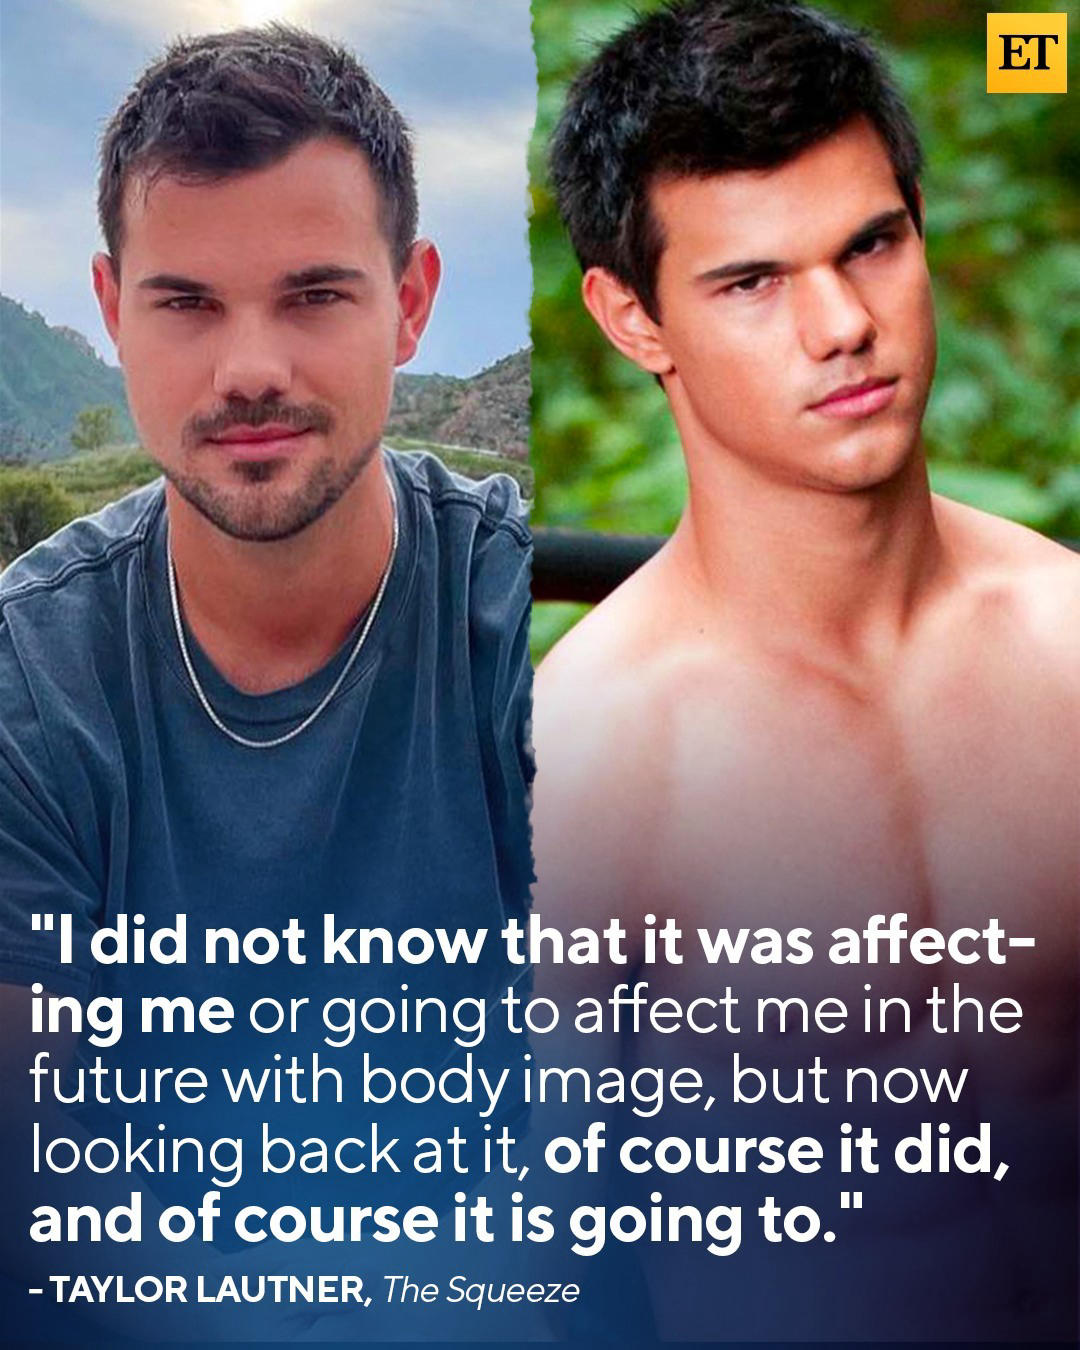 Taylor Lautner is opening up about his body image issues after starring in the 'Twilight' franchise